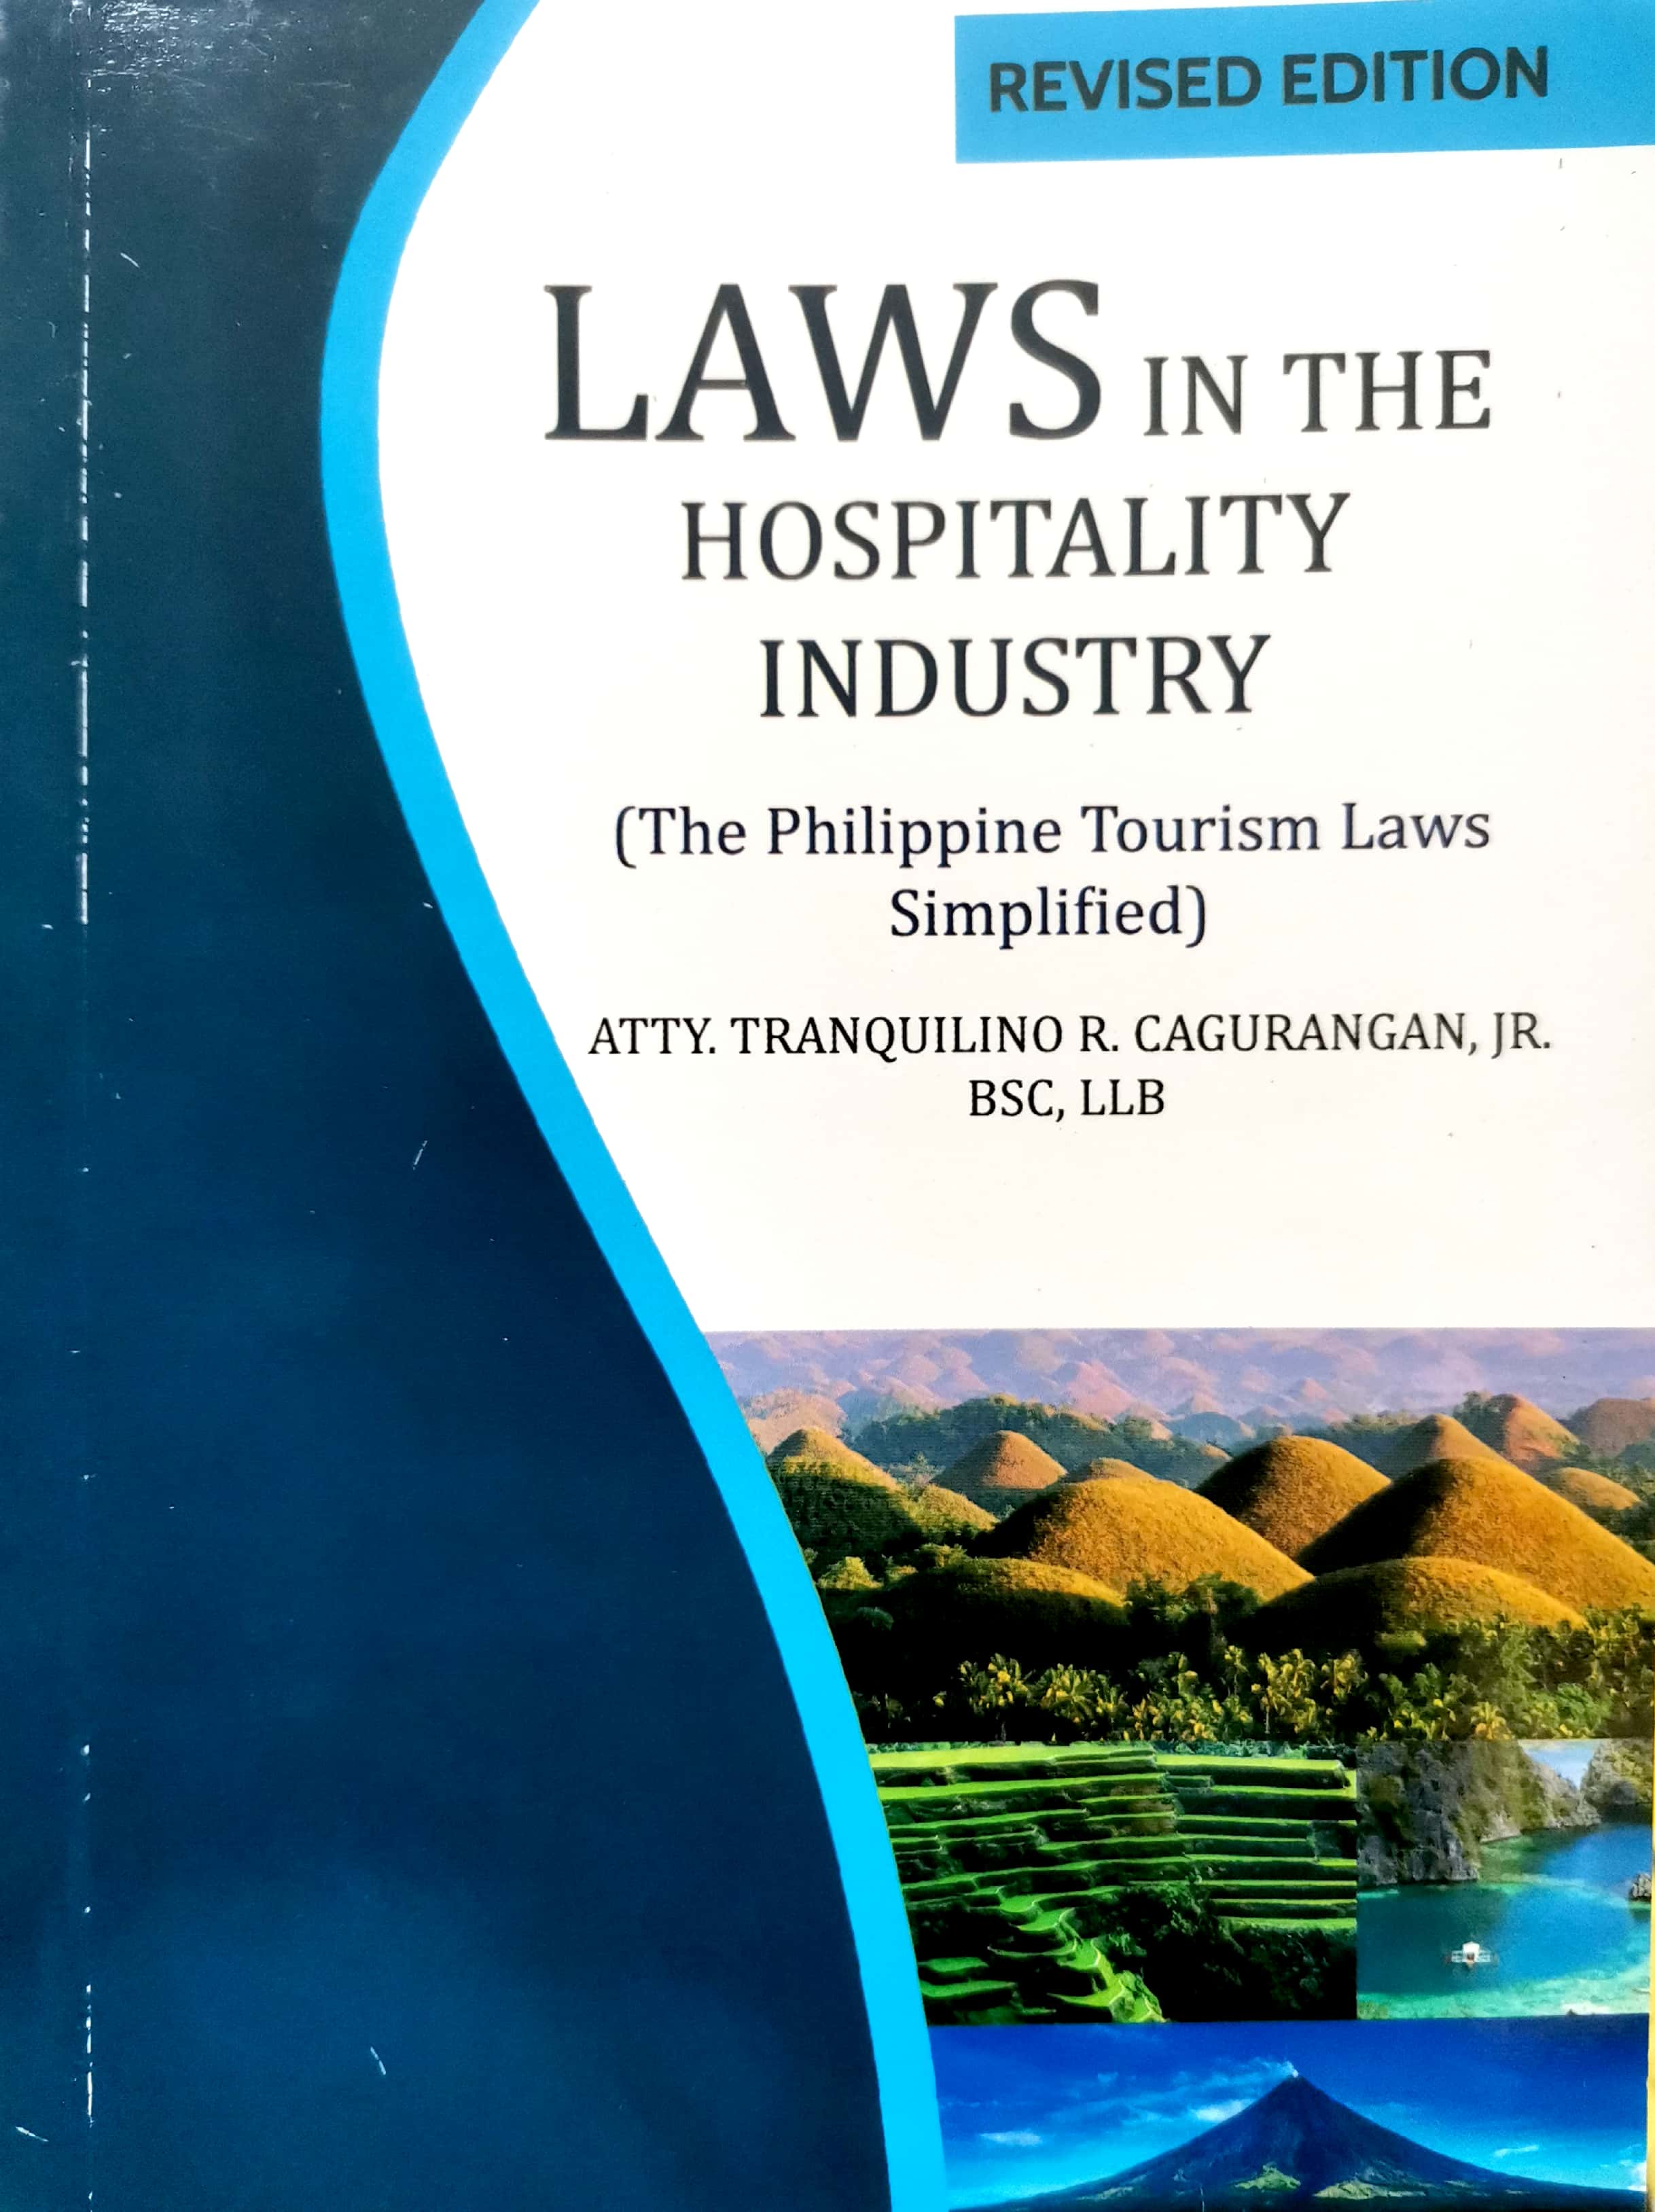 tourism and hospitality laws in the philippines